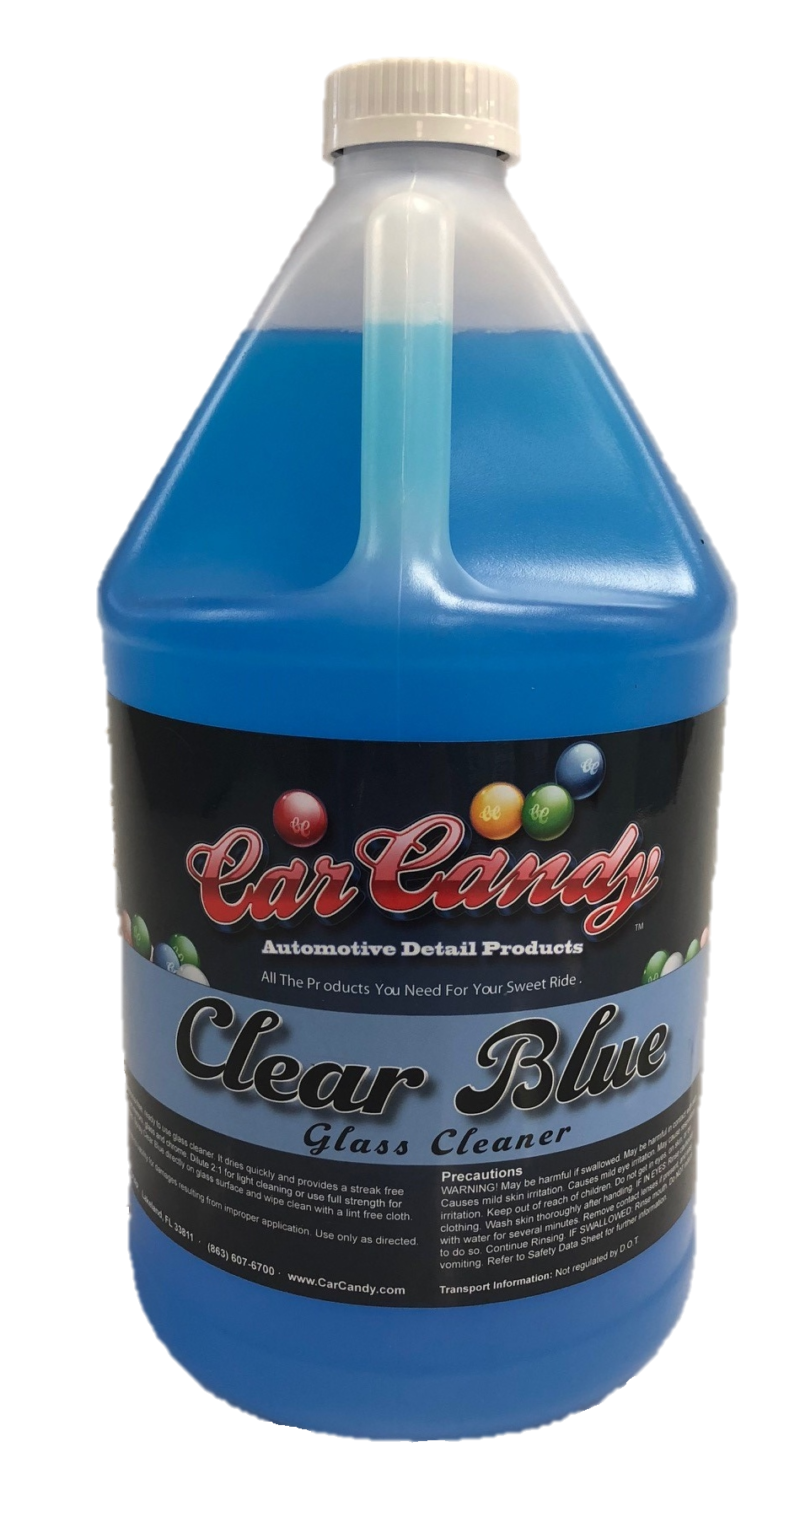 Clear blue glass cleaner